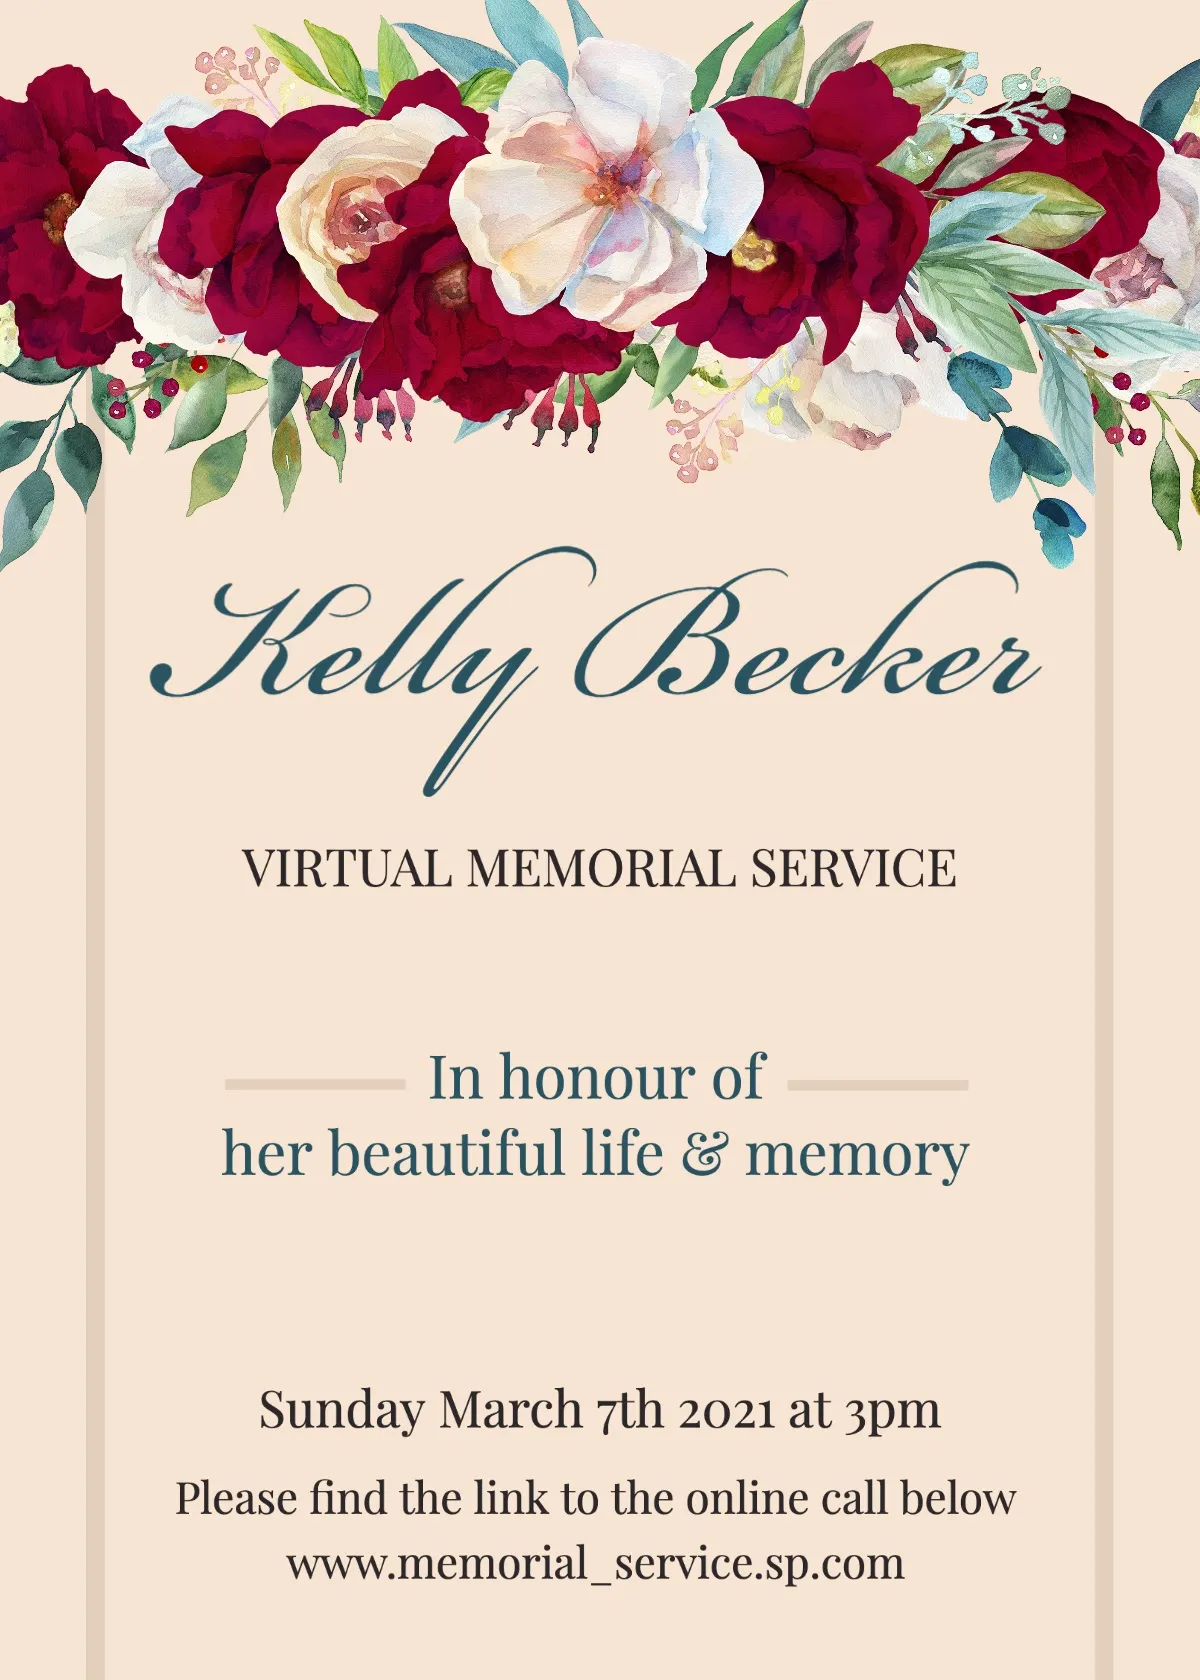 Cream & Red Floral Funeral Invitation Card